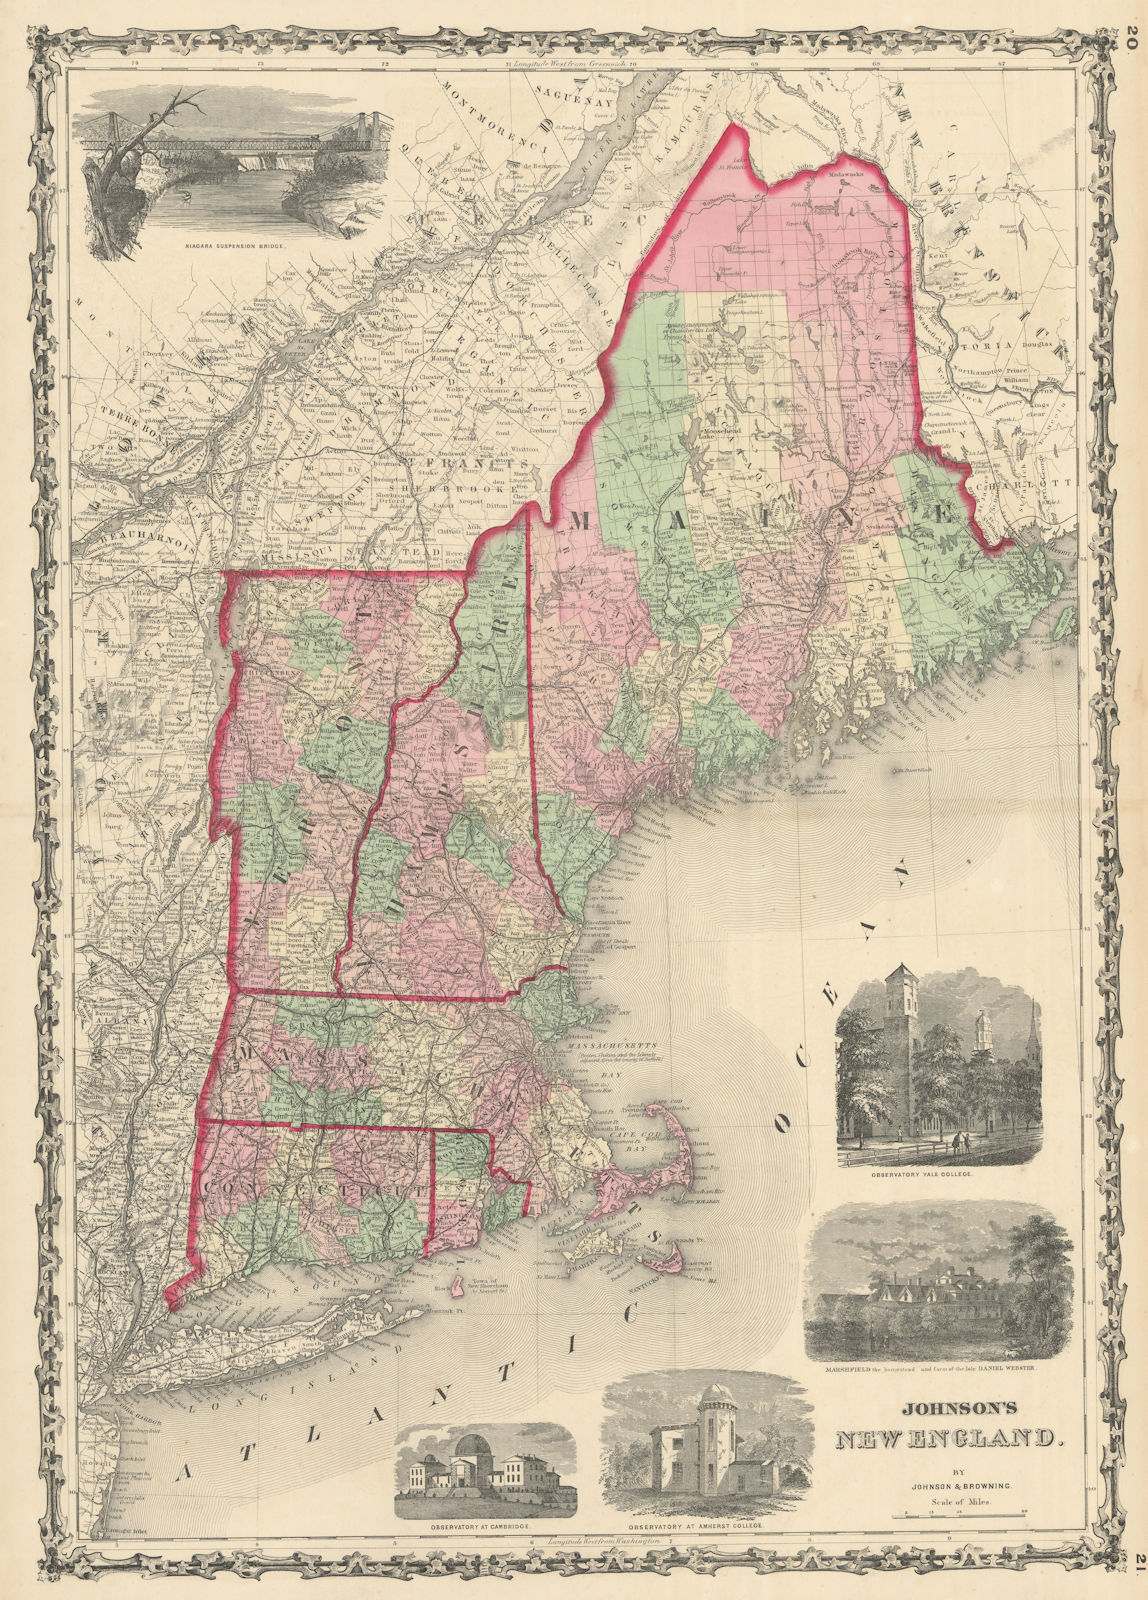 Johnson's New England. Maine NH Vermont Massachusetts Connecticut 1861 old map